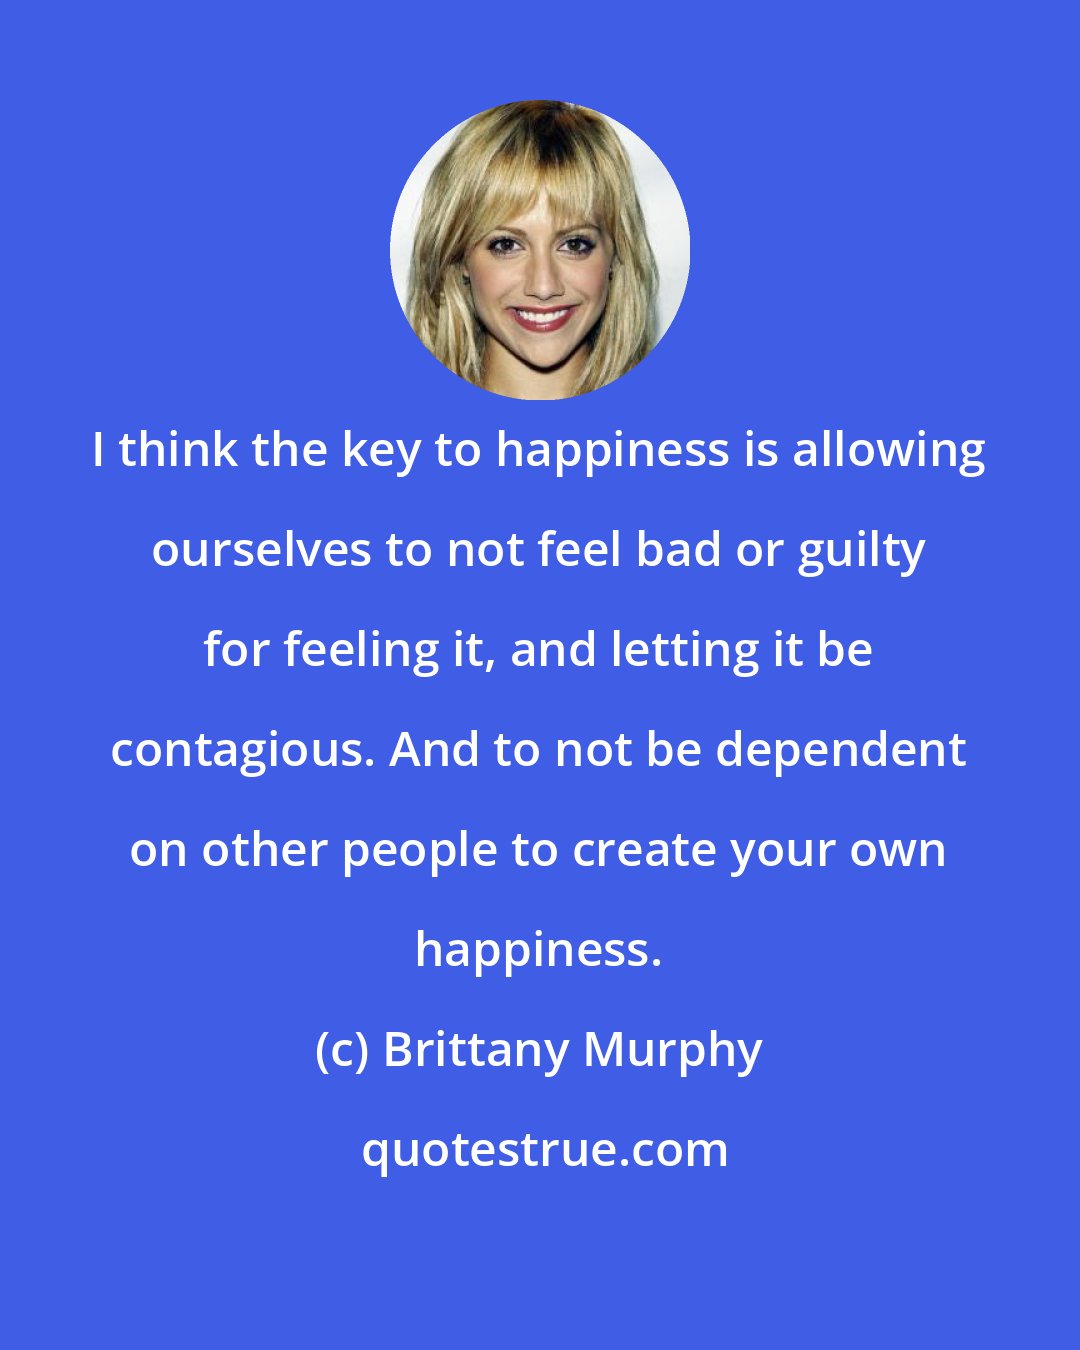 Brittany Murphy: I think the key to happiness is allowing ourselves to not feel bad or guilty for feeling it, and letting it be contagious. And to not be dependent on other people to create your own happiness.